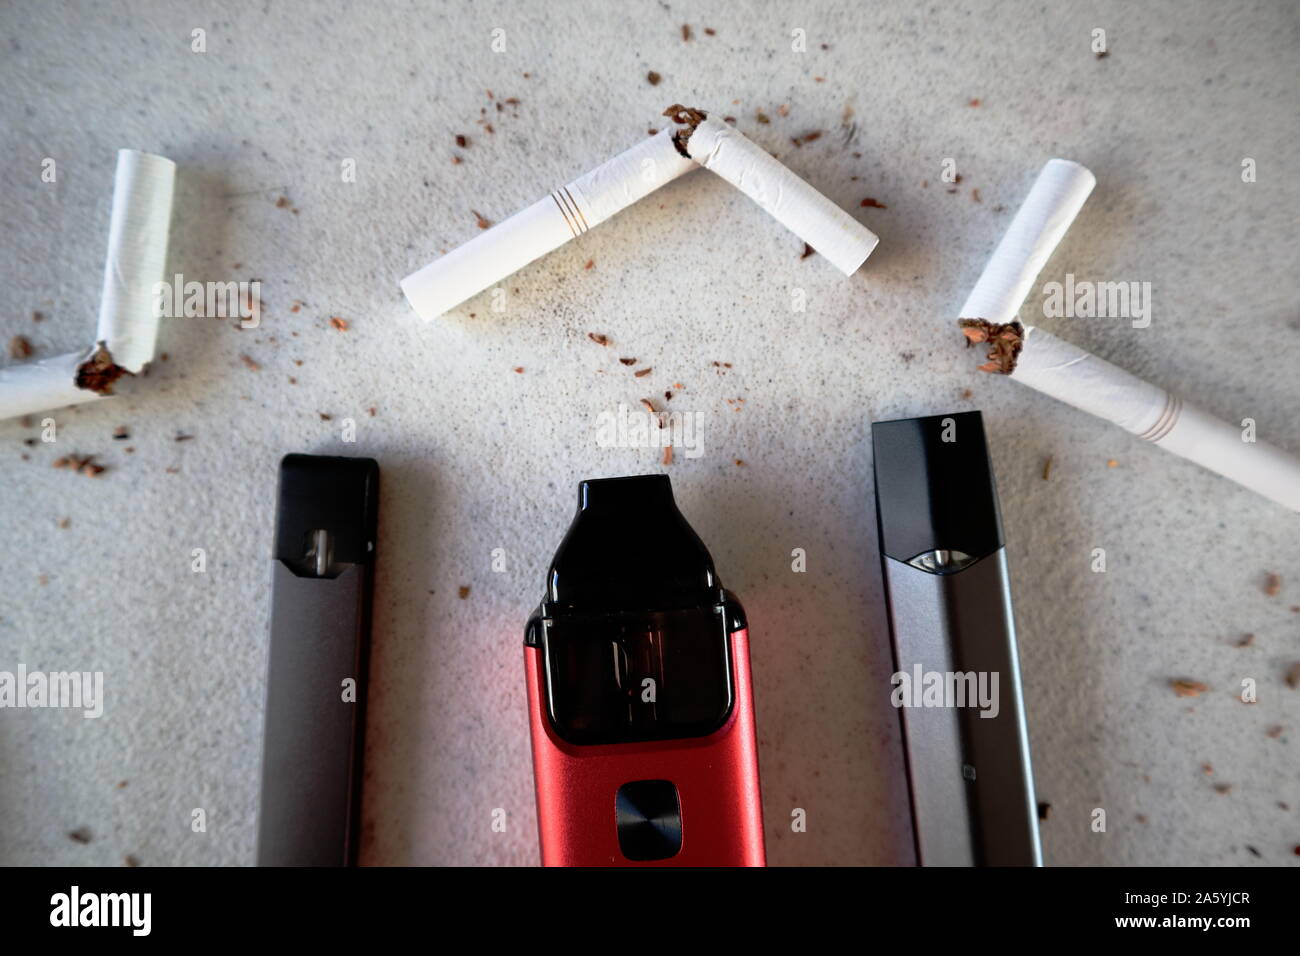 Different vape devices electronic cigarettes as smoking alternatives with broken cigarettes and scattered tobacco on white textured background close u Stock Photo